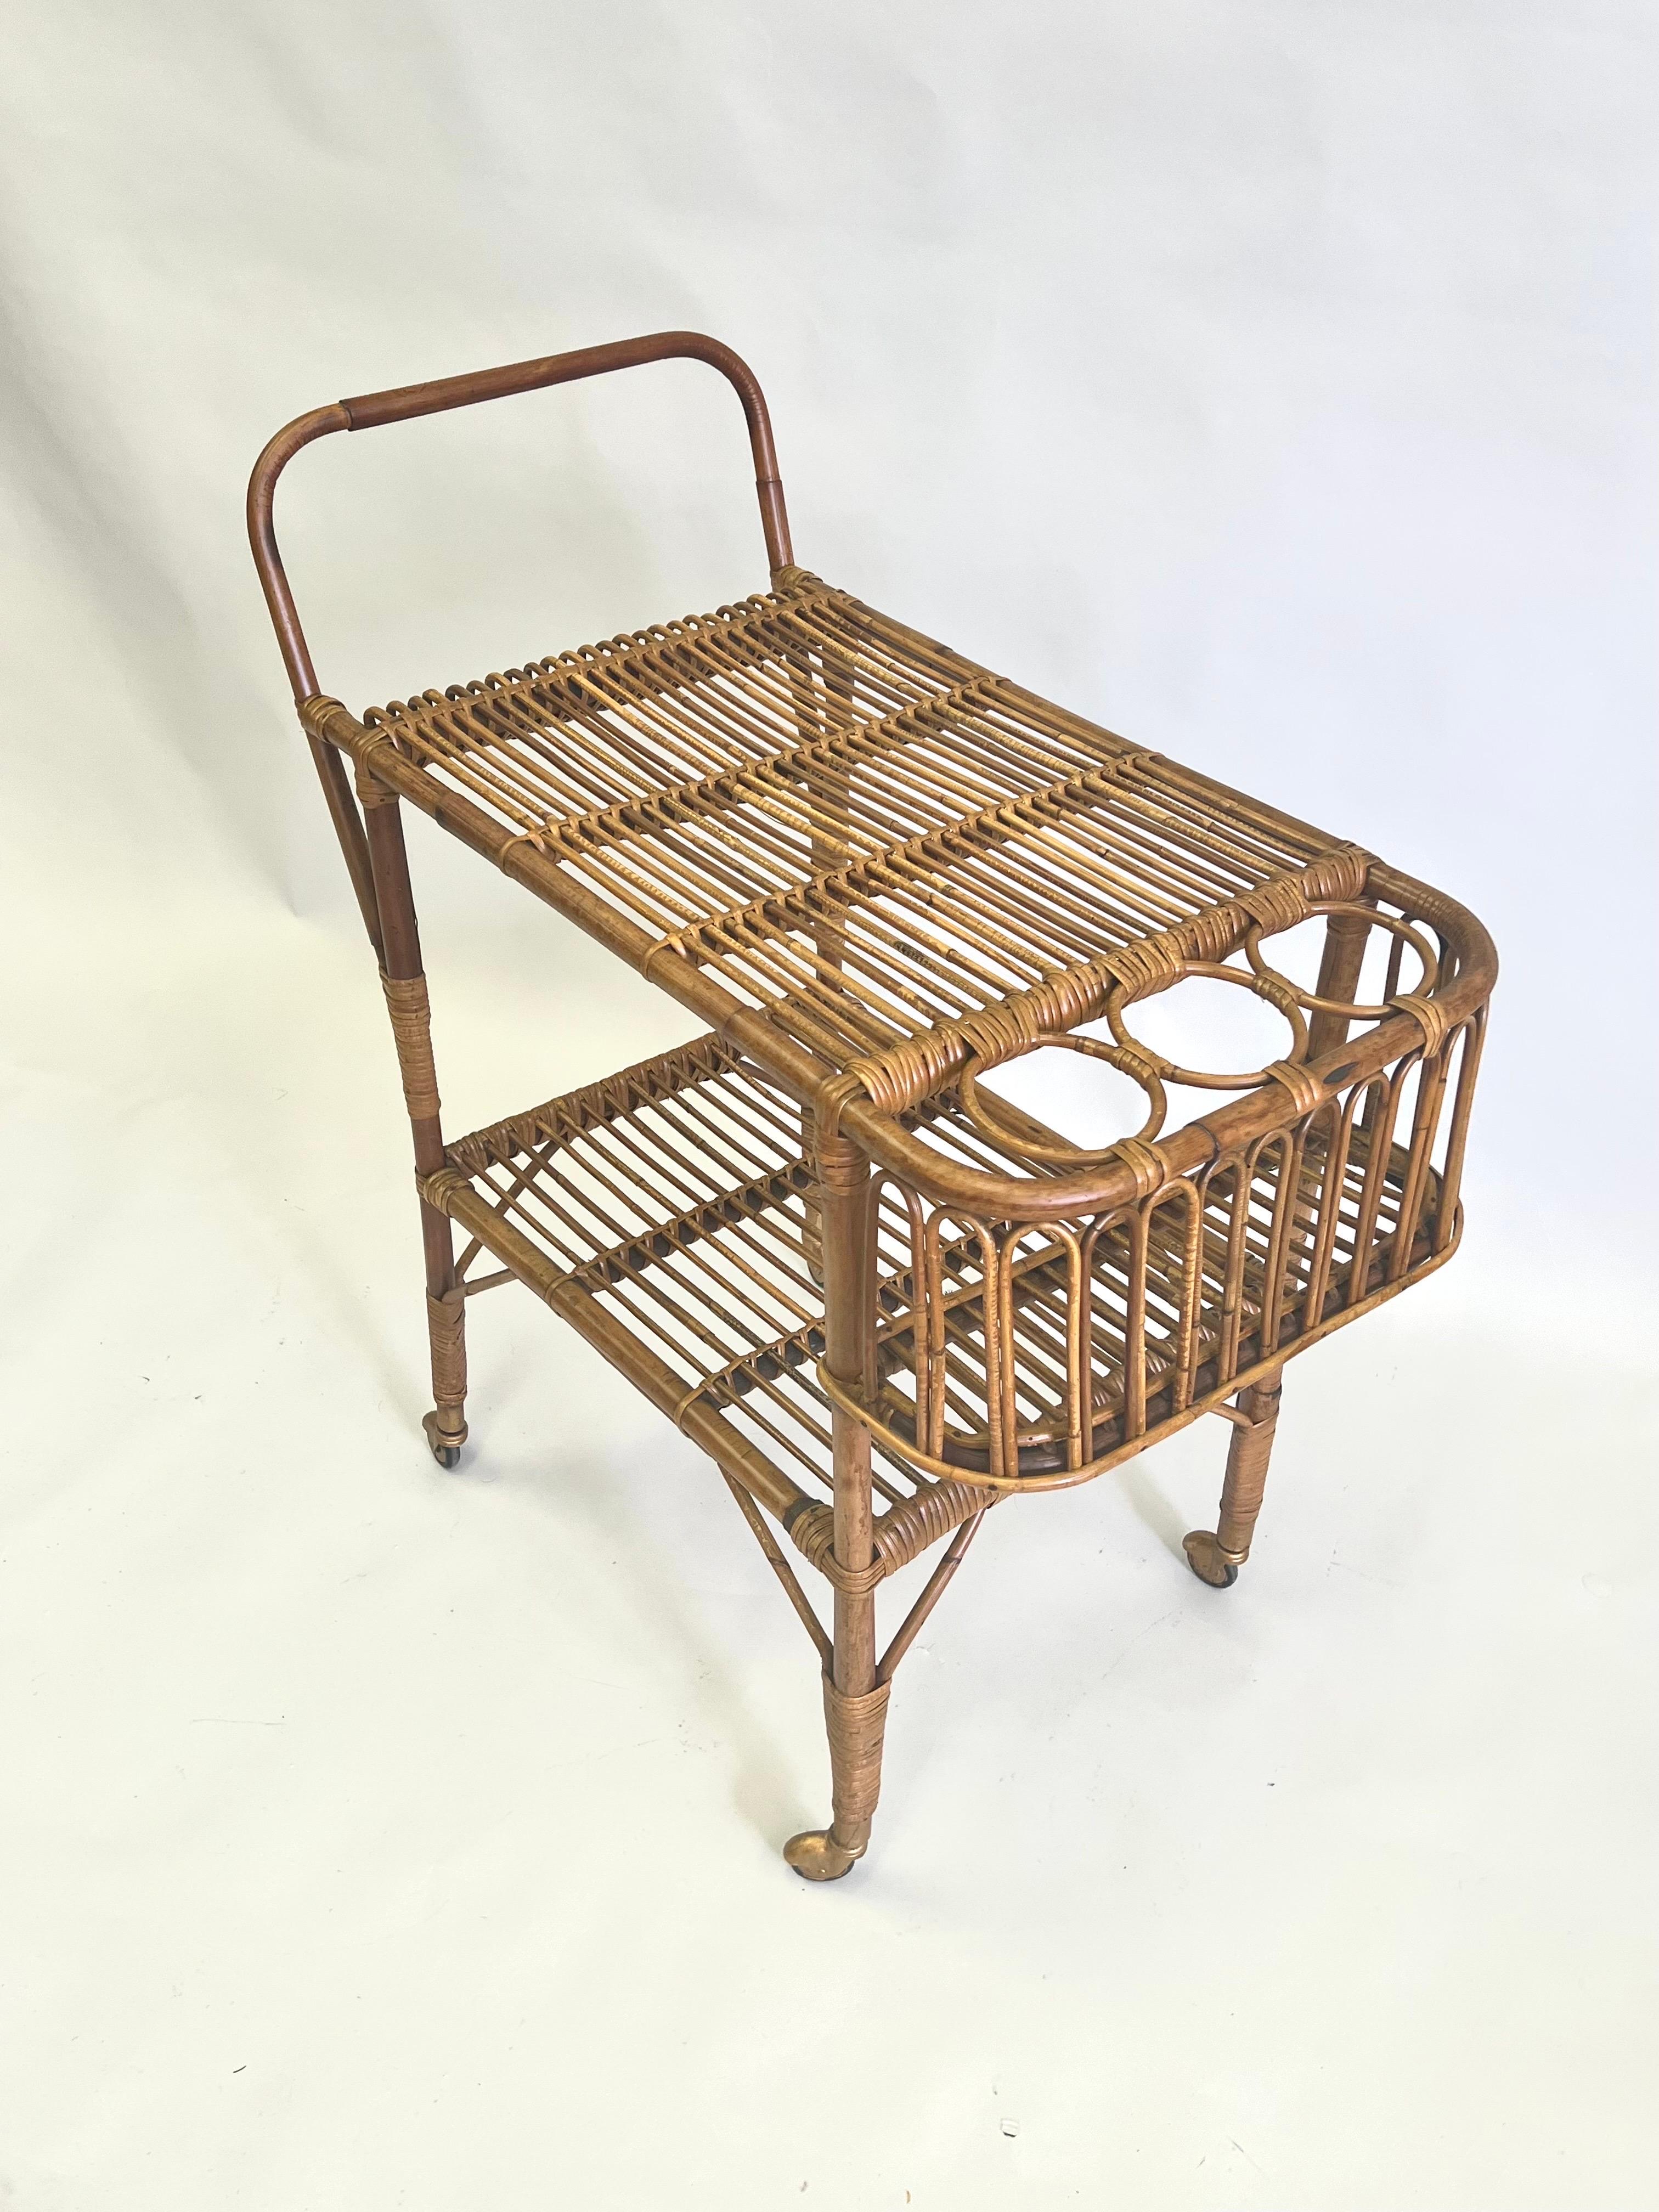 Rare and important Italian Mid-Century Modern rattan and glass bar or serving cart by Franco Albini. The piece is unique in linking traditional materials (rattan, bamboo) with an open, transparent aesthetic reflective of modernism. The stunning,